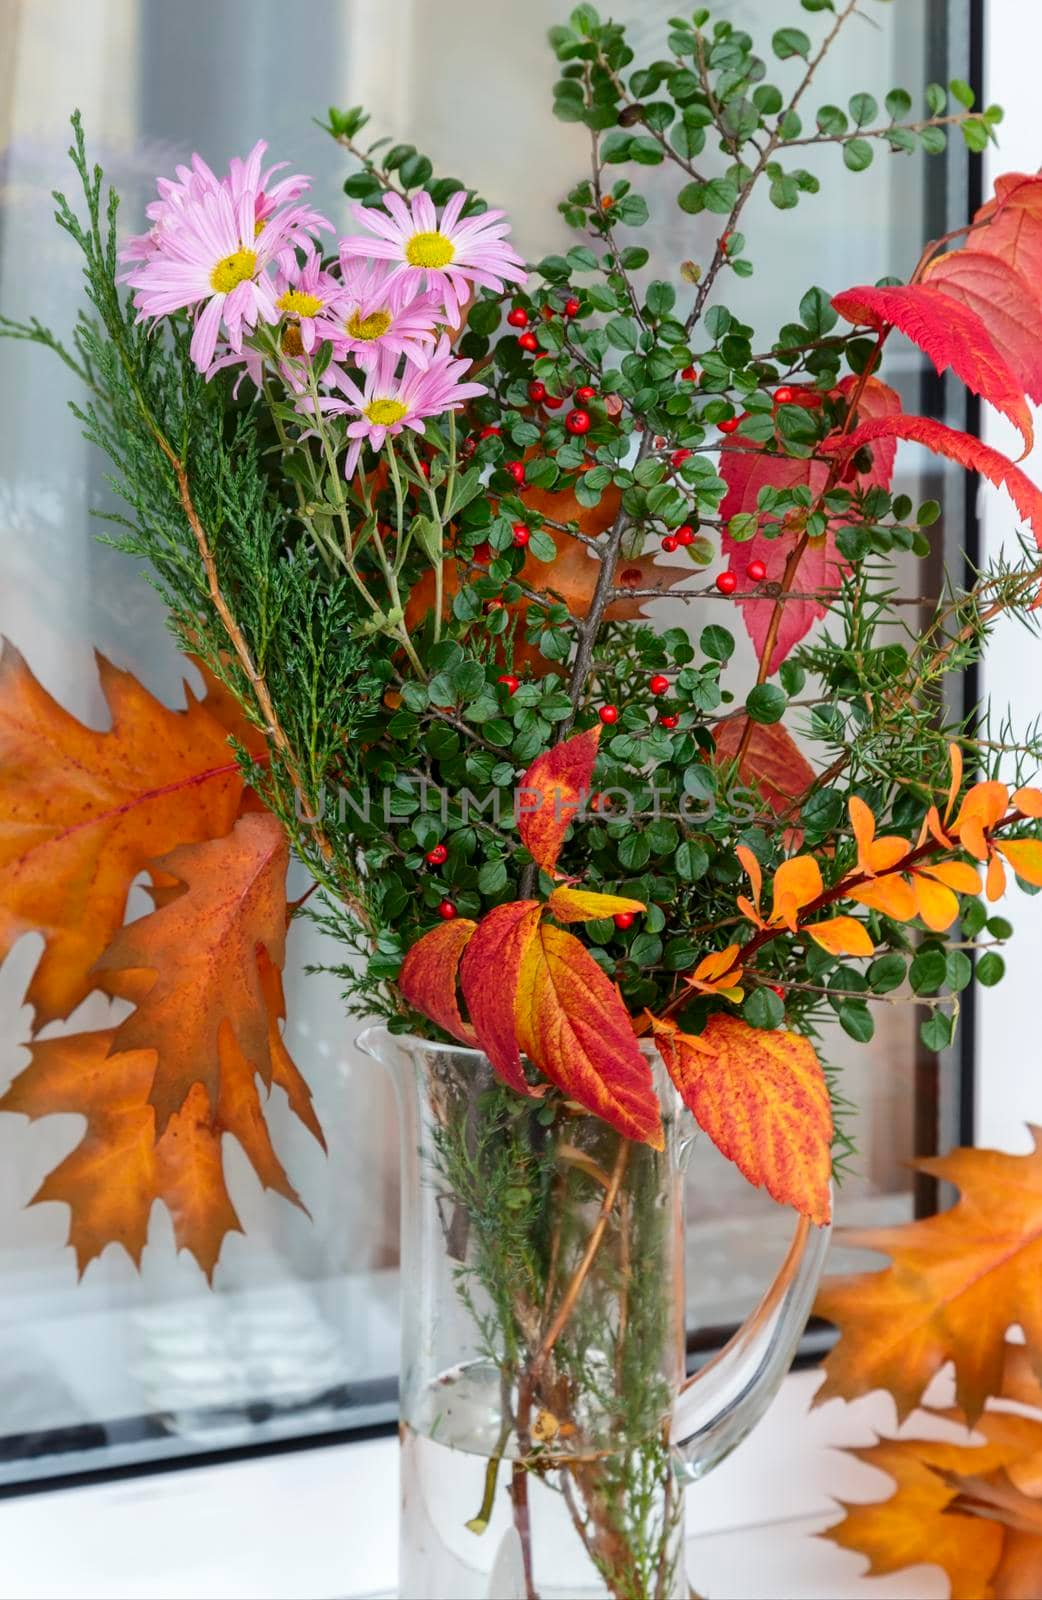 On the window sill in a glass decanter beautiful autumn bouquet of flowers and bright autumn leaves.